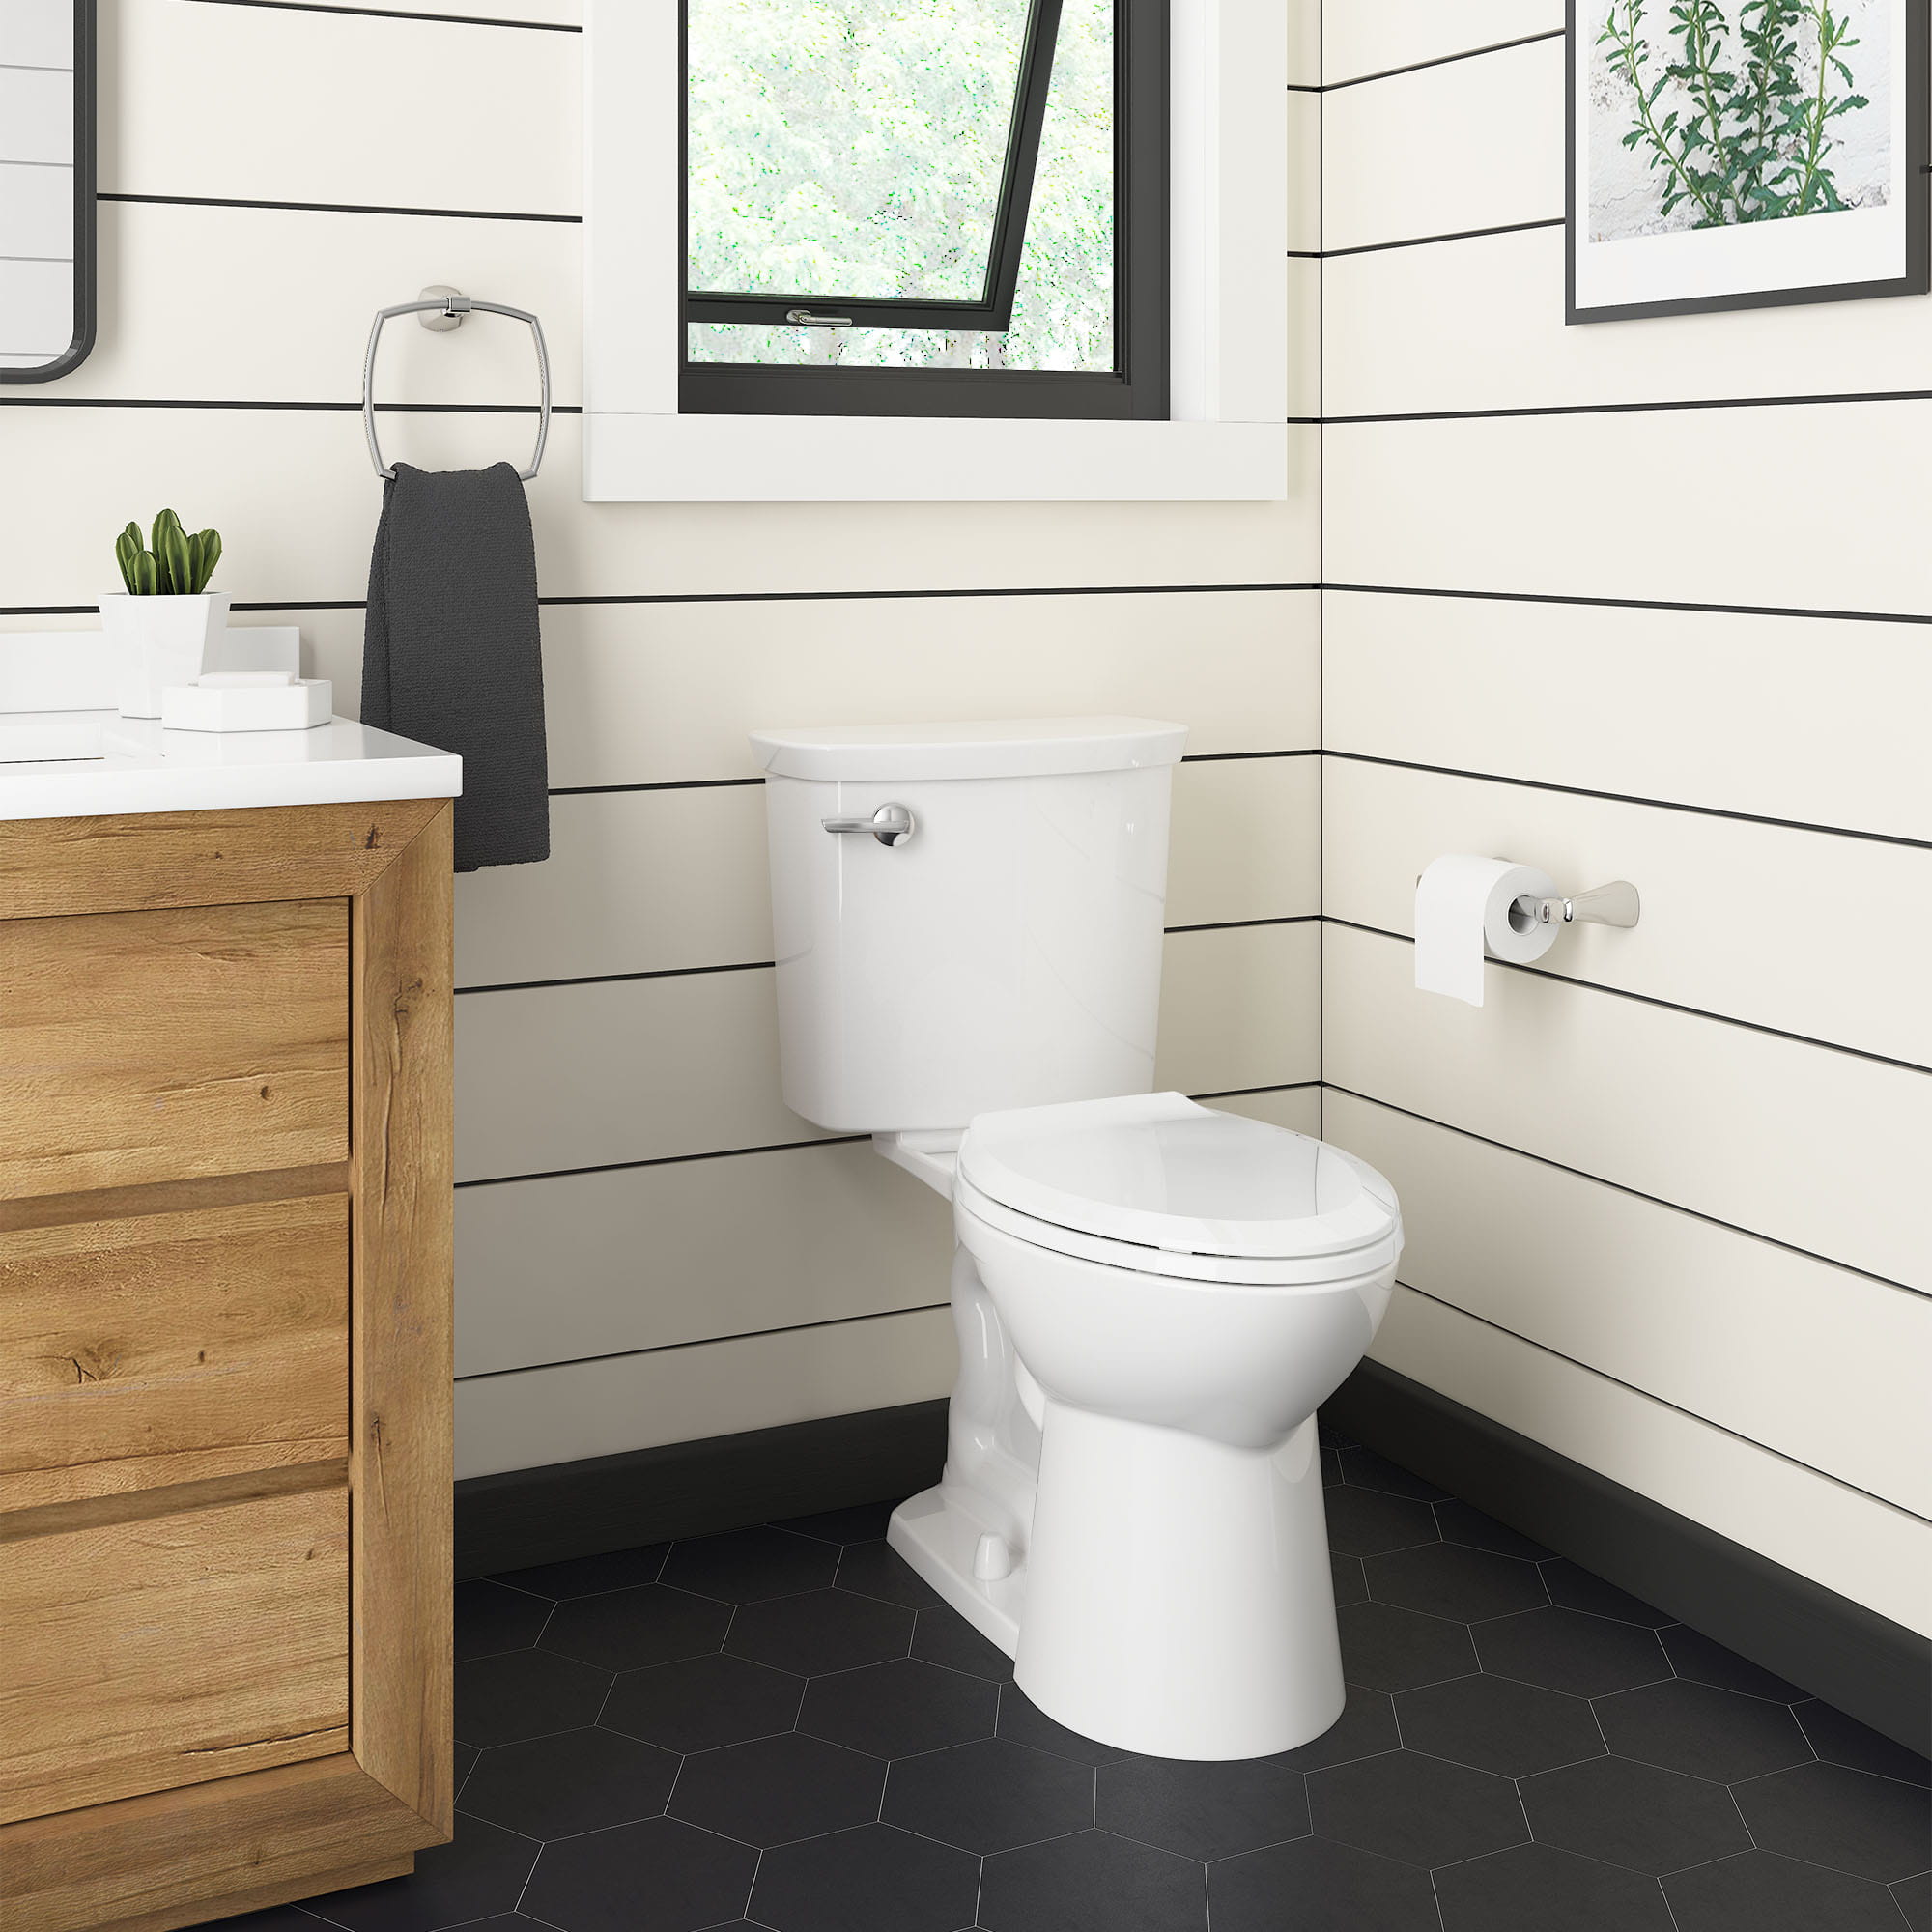 Homestead VorMax Two-Piece 1.28 gpf/4.8 Lpf Chair Height Elongated Toilet with Seat